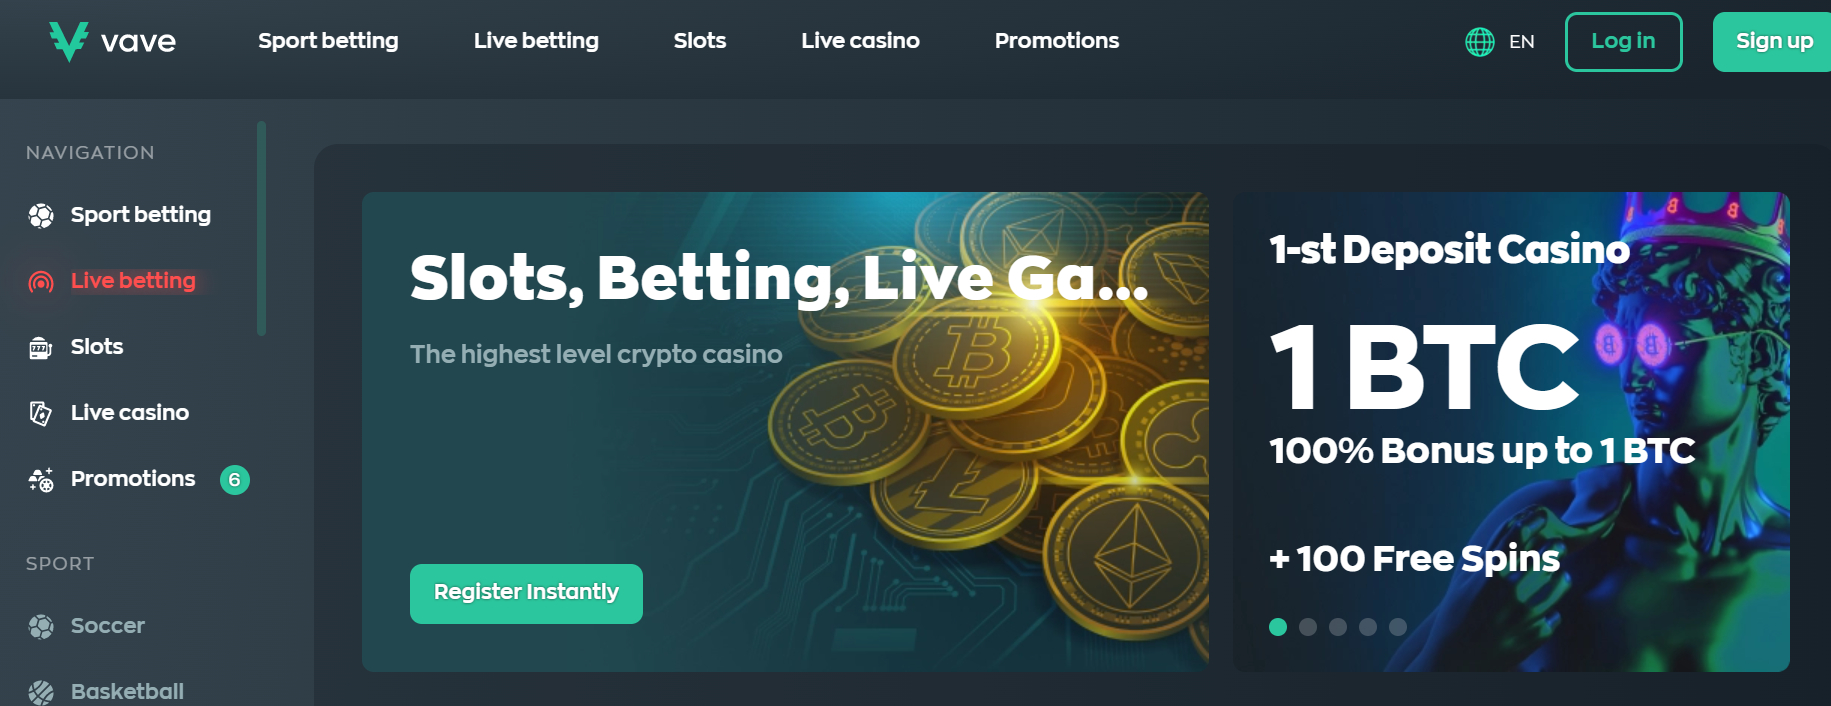 Vave crypto gambling site